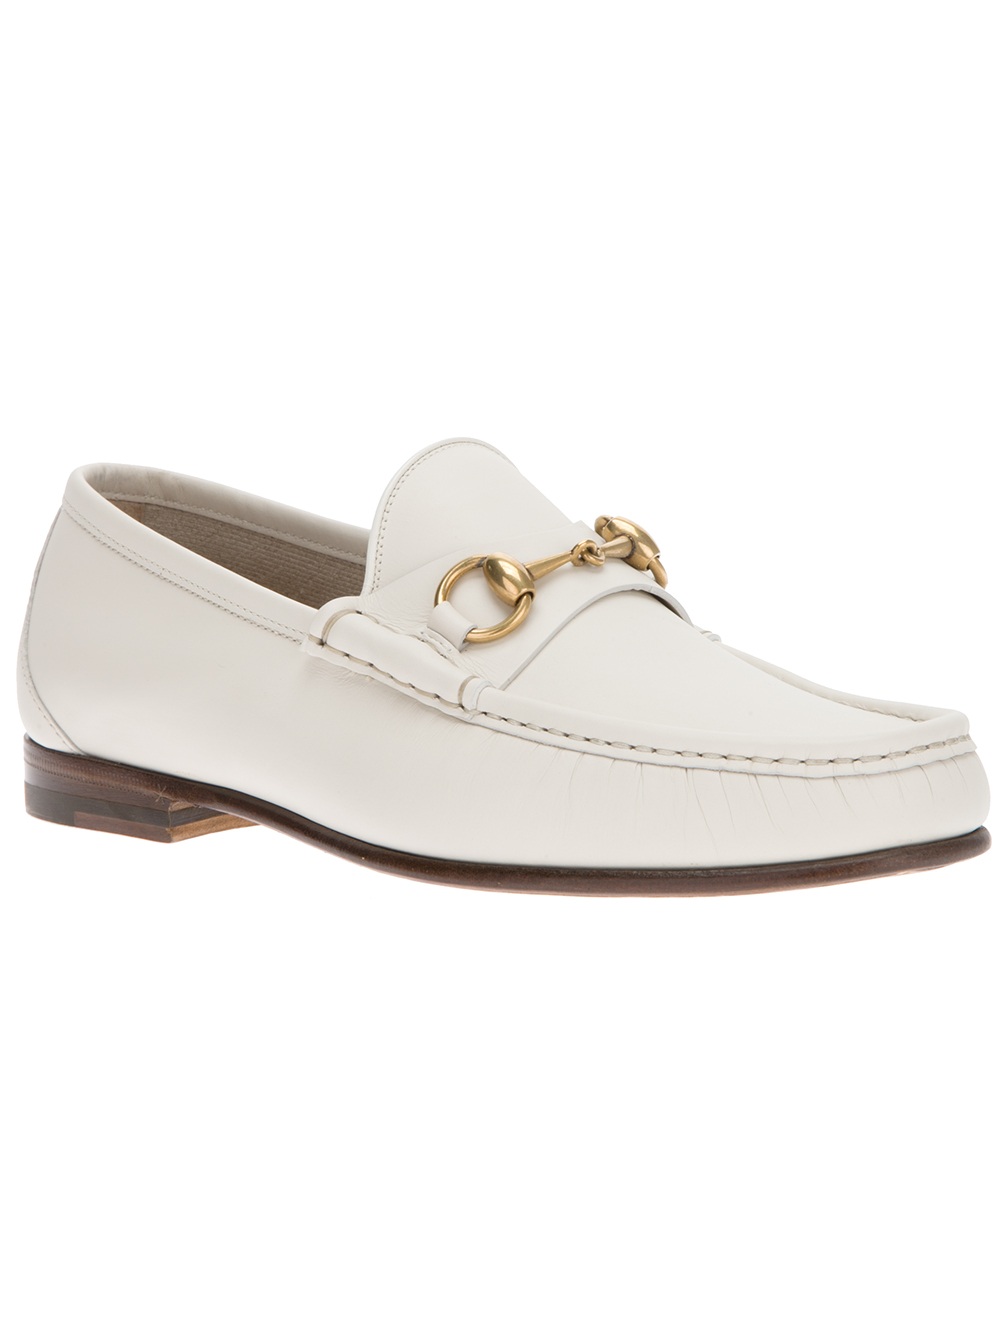 Gucci Stirrup Loafer in White for Men | Lyst